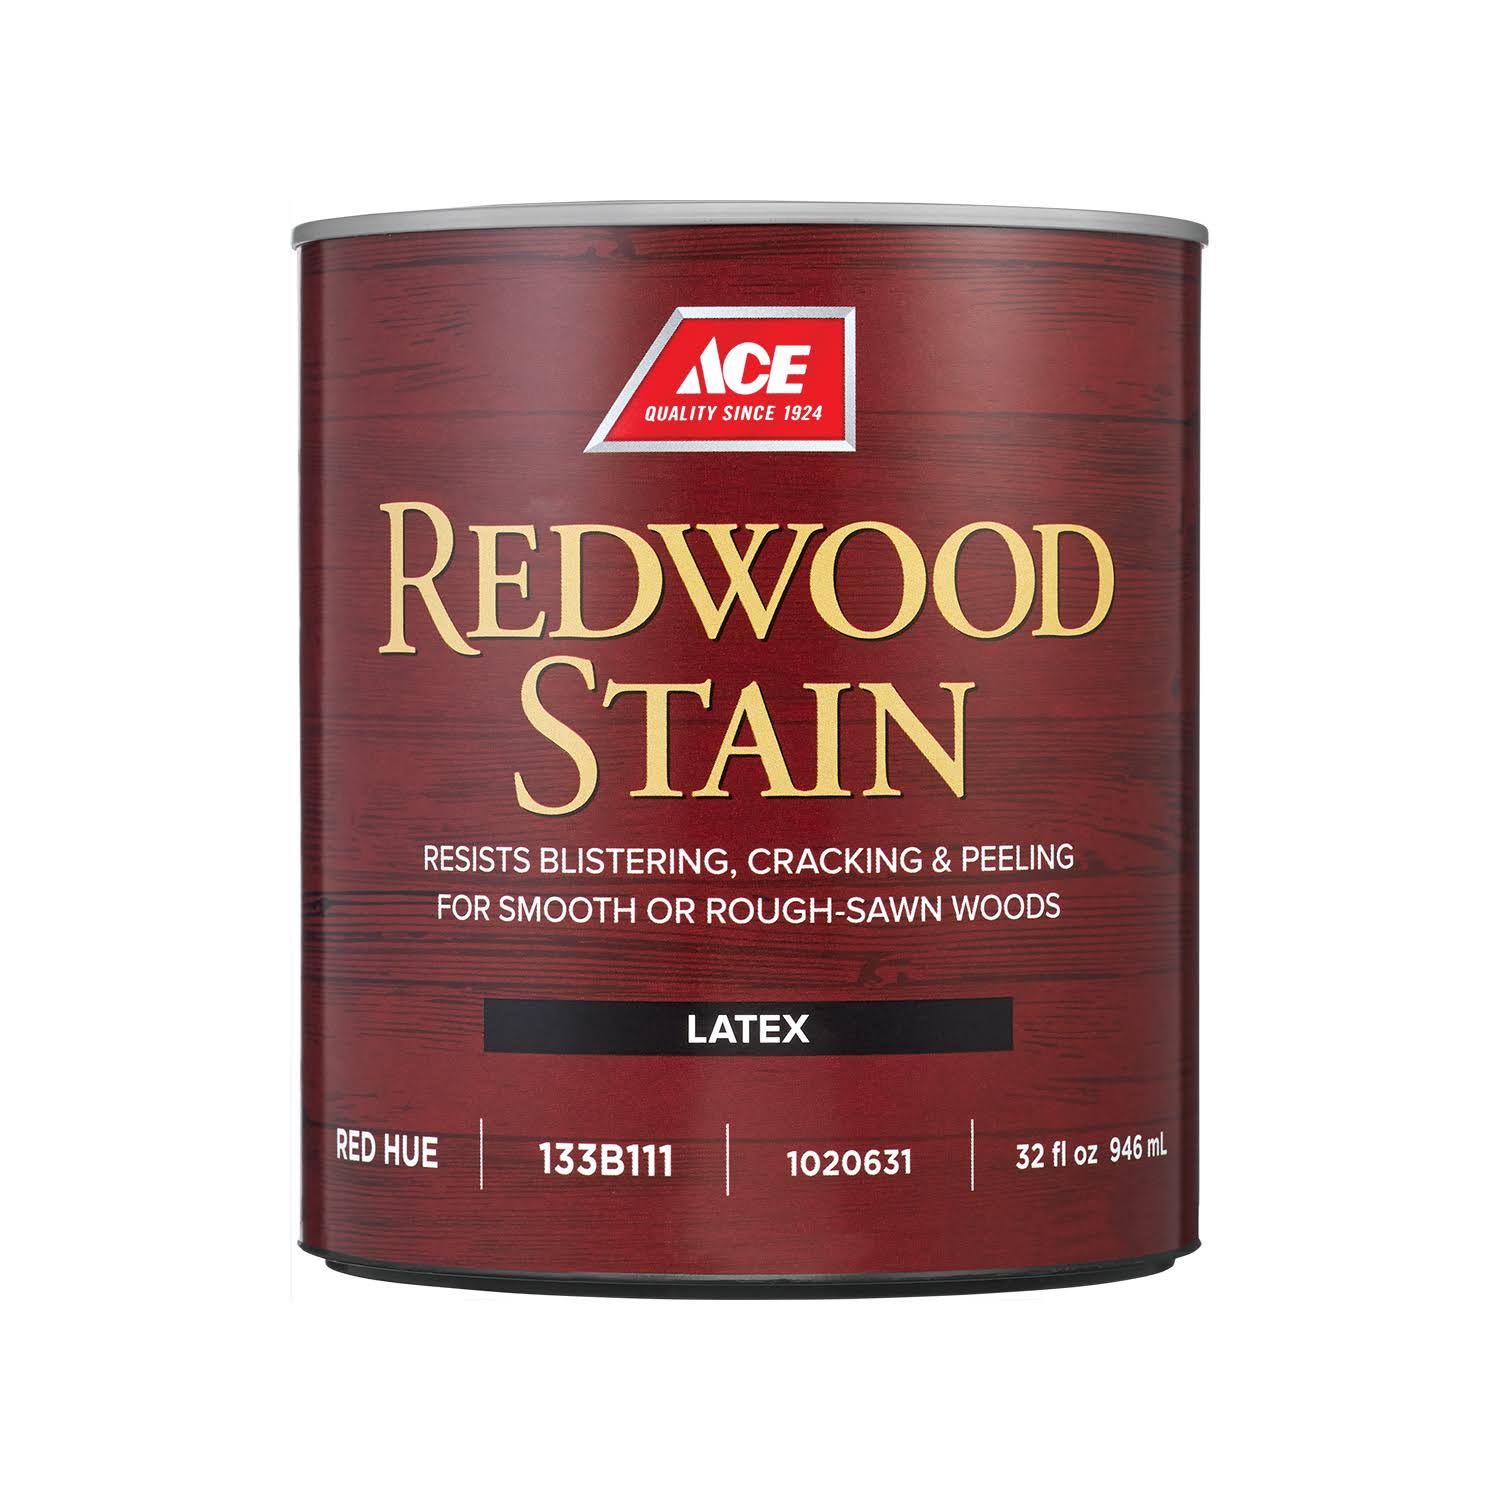 Ace Redwood Stain Semi-Transparent Flat Red Hue Latex Stain 1 qt.